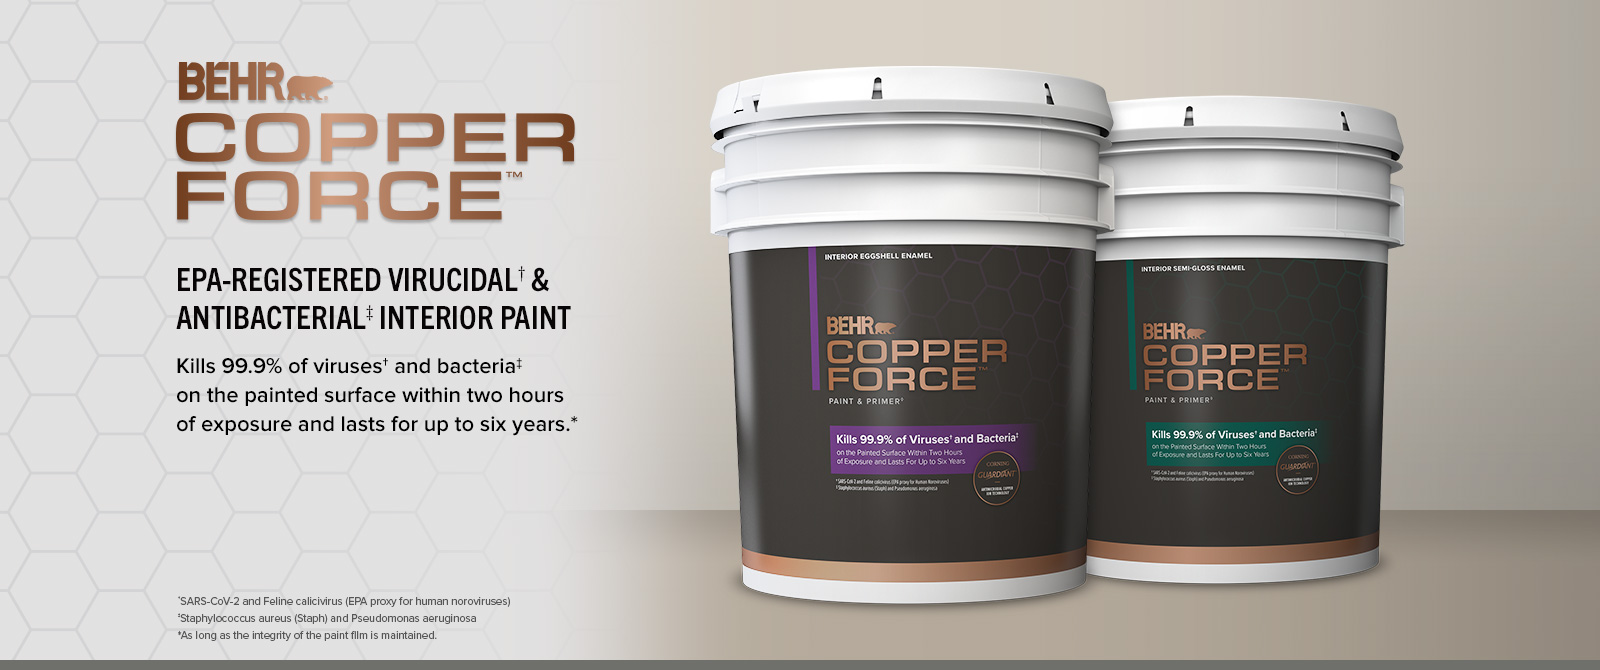 Introducing BEHR COPPER FORCE Interior Product